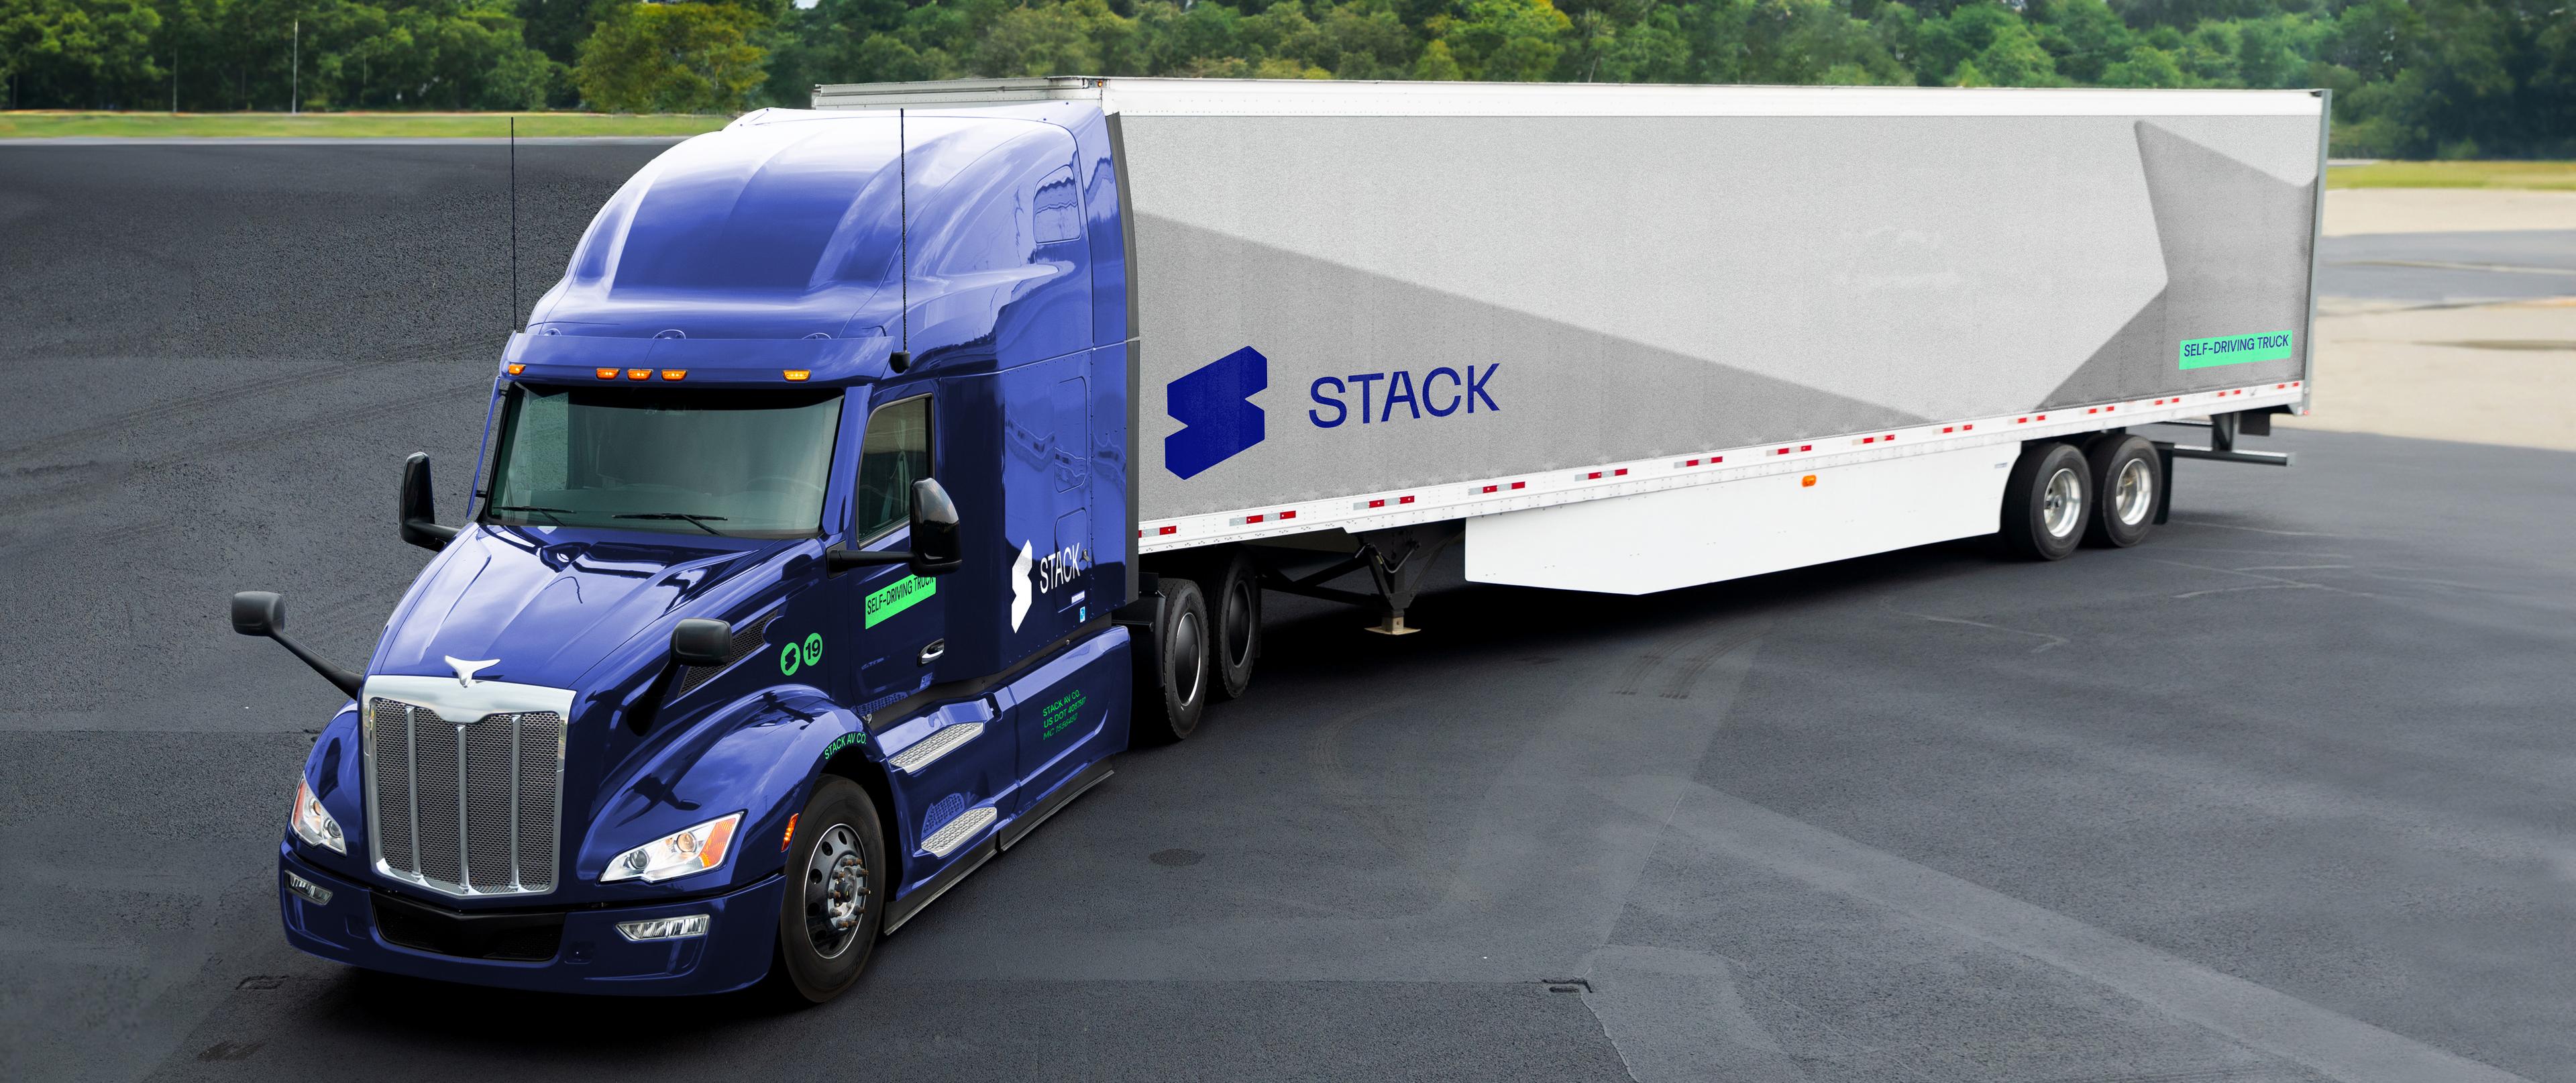 Stack truck 2